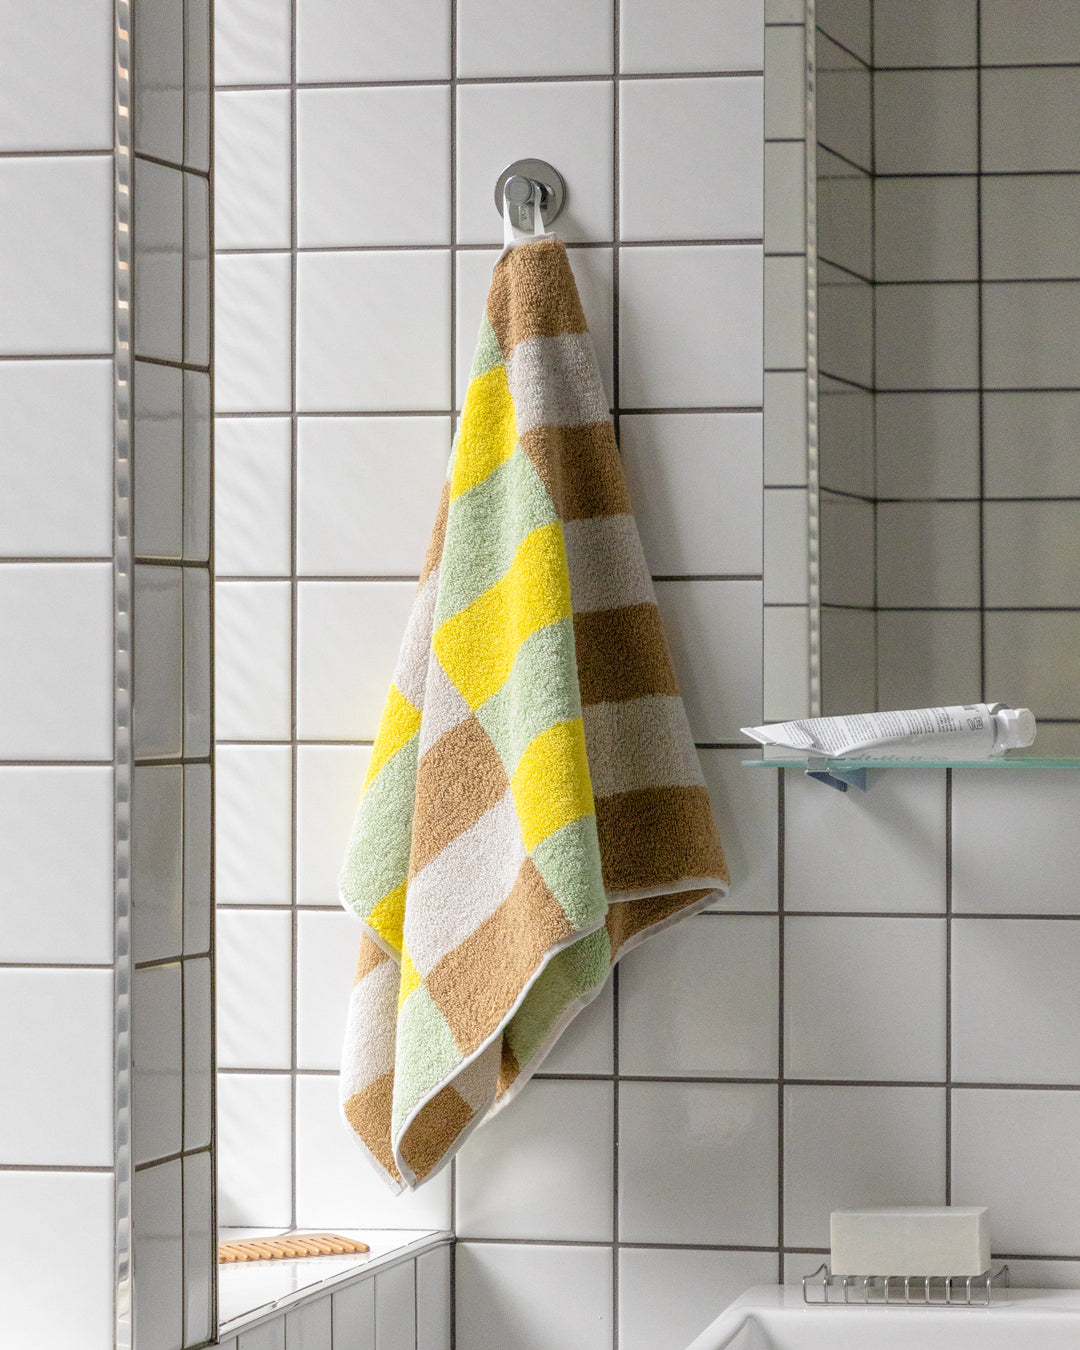 CHECK FACE TOWEL - SAND YELLOW